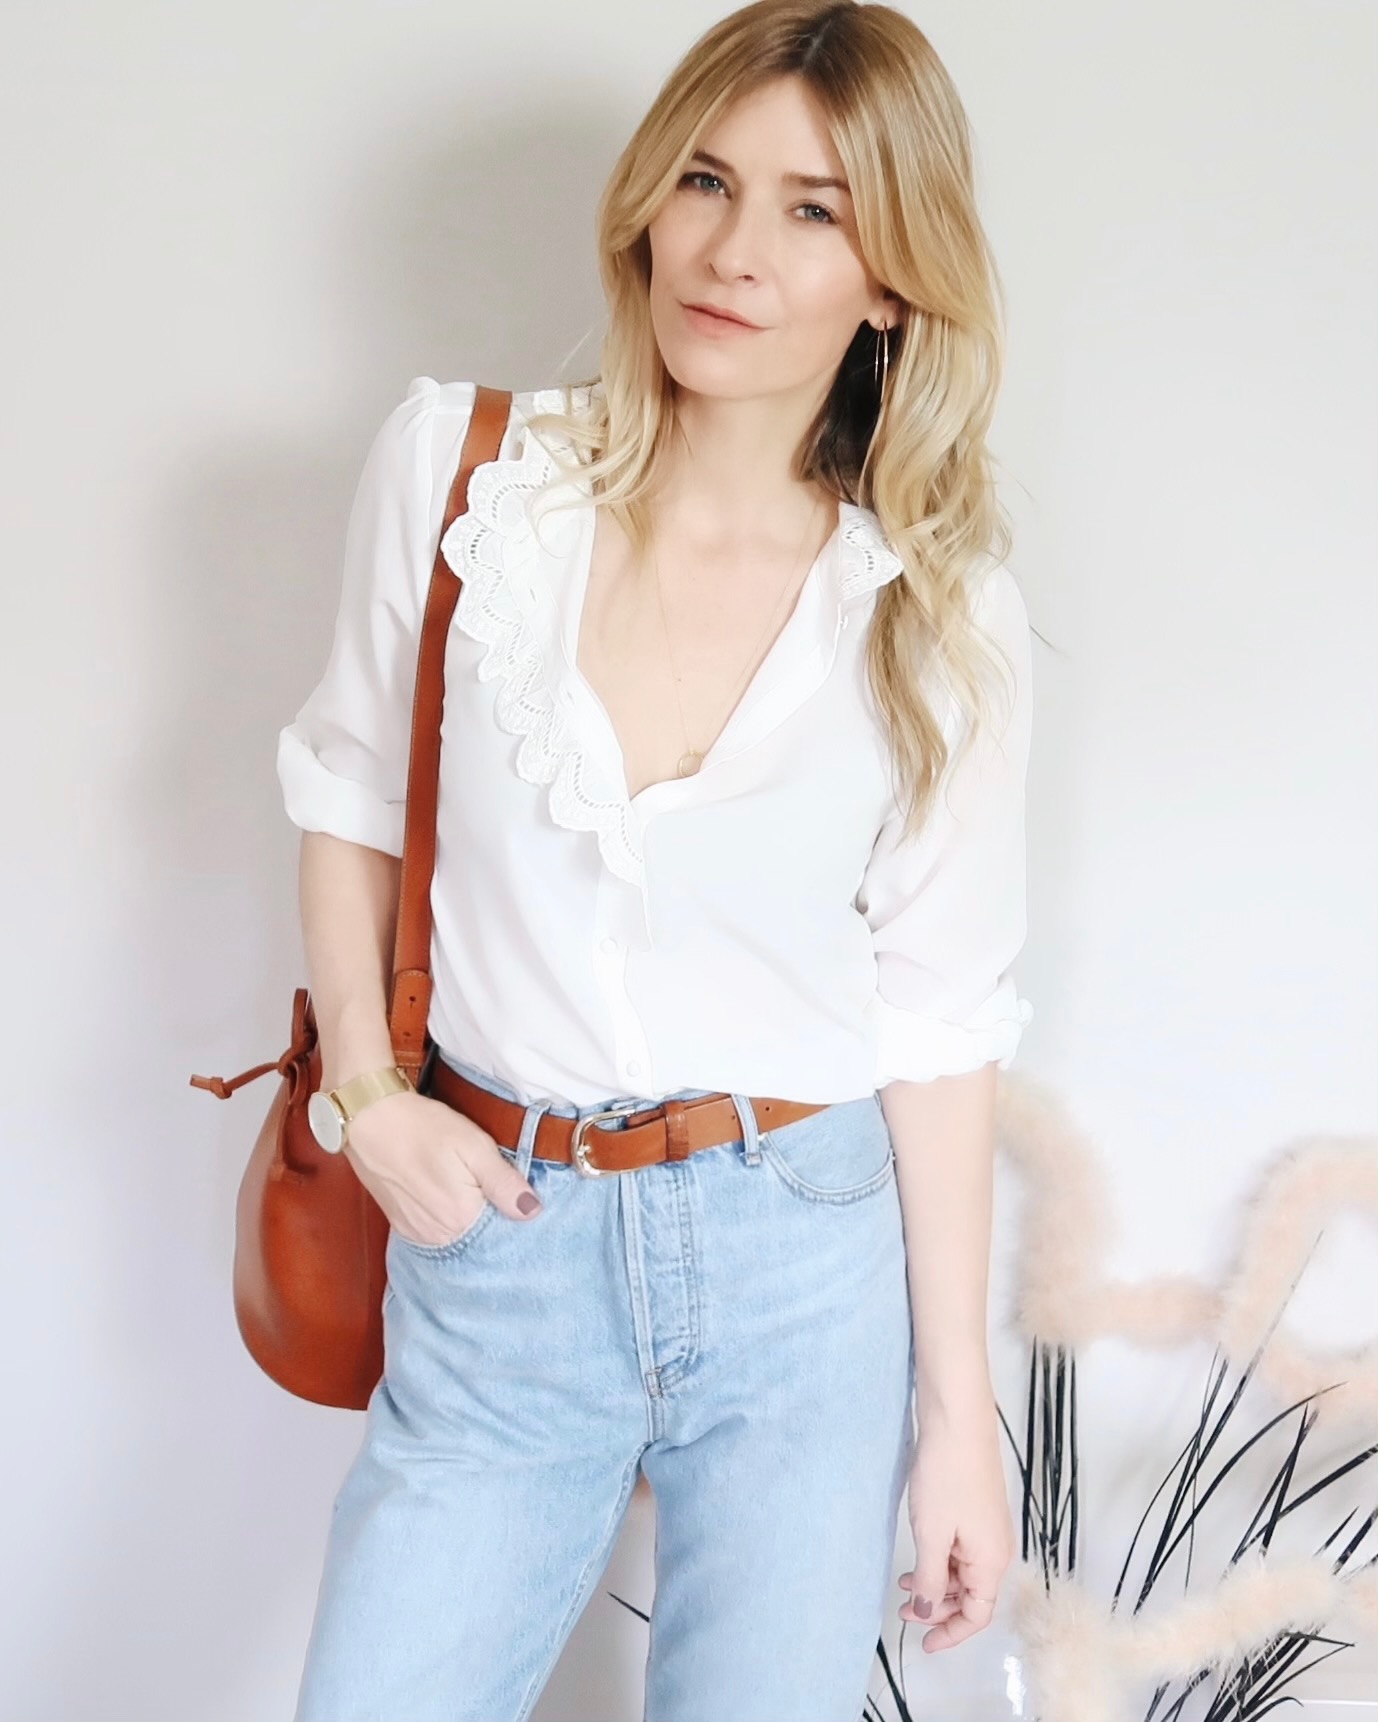 Effortlessly Chic: Styling a Casual OOTD for Everyday